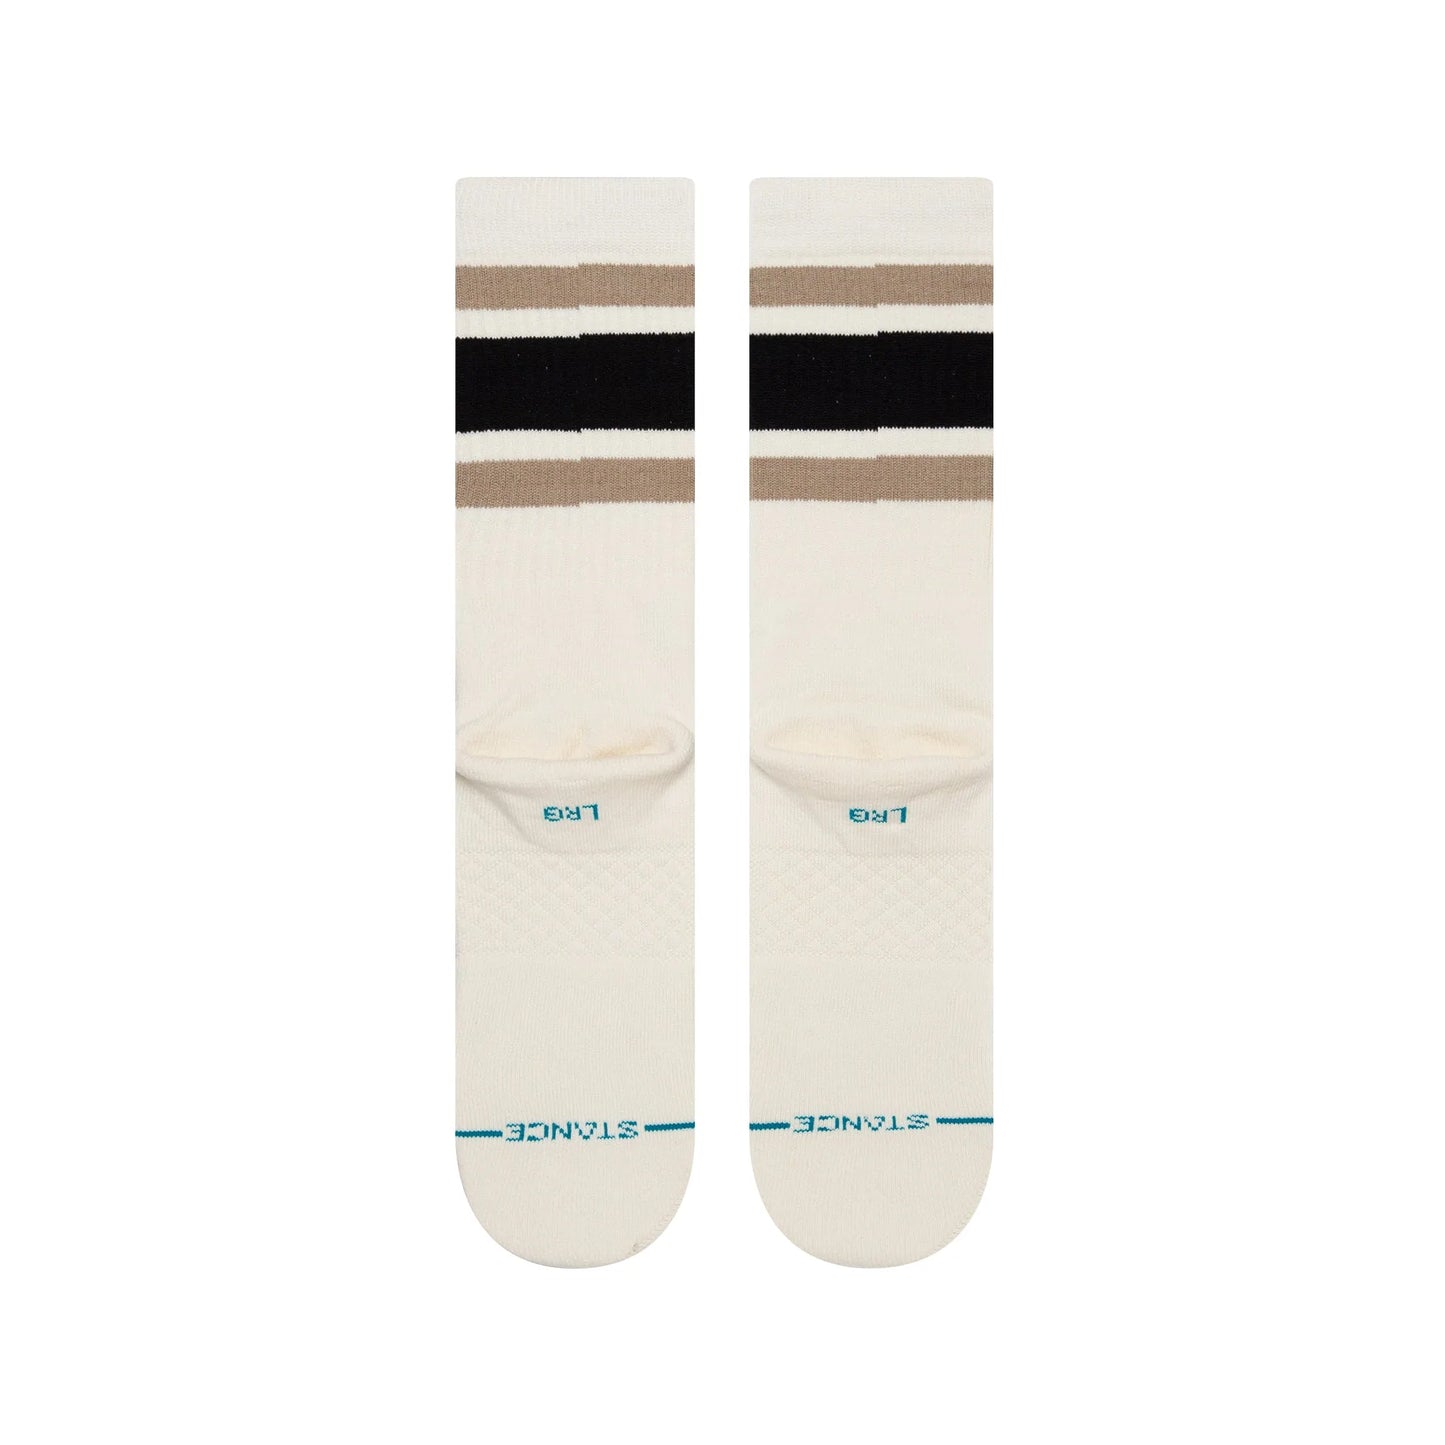 Contrast Clothing Worthing stance crew boyd socks taupe